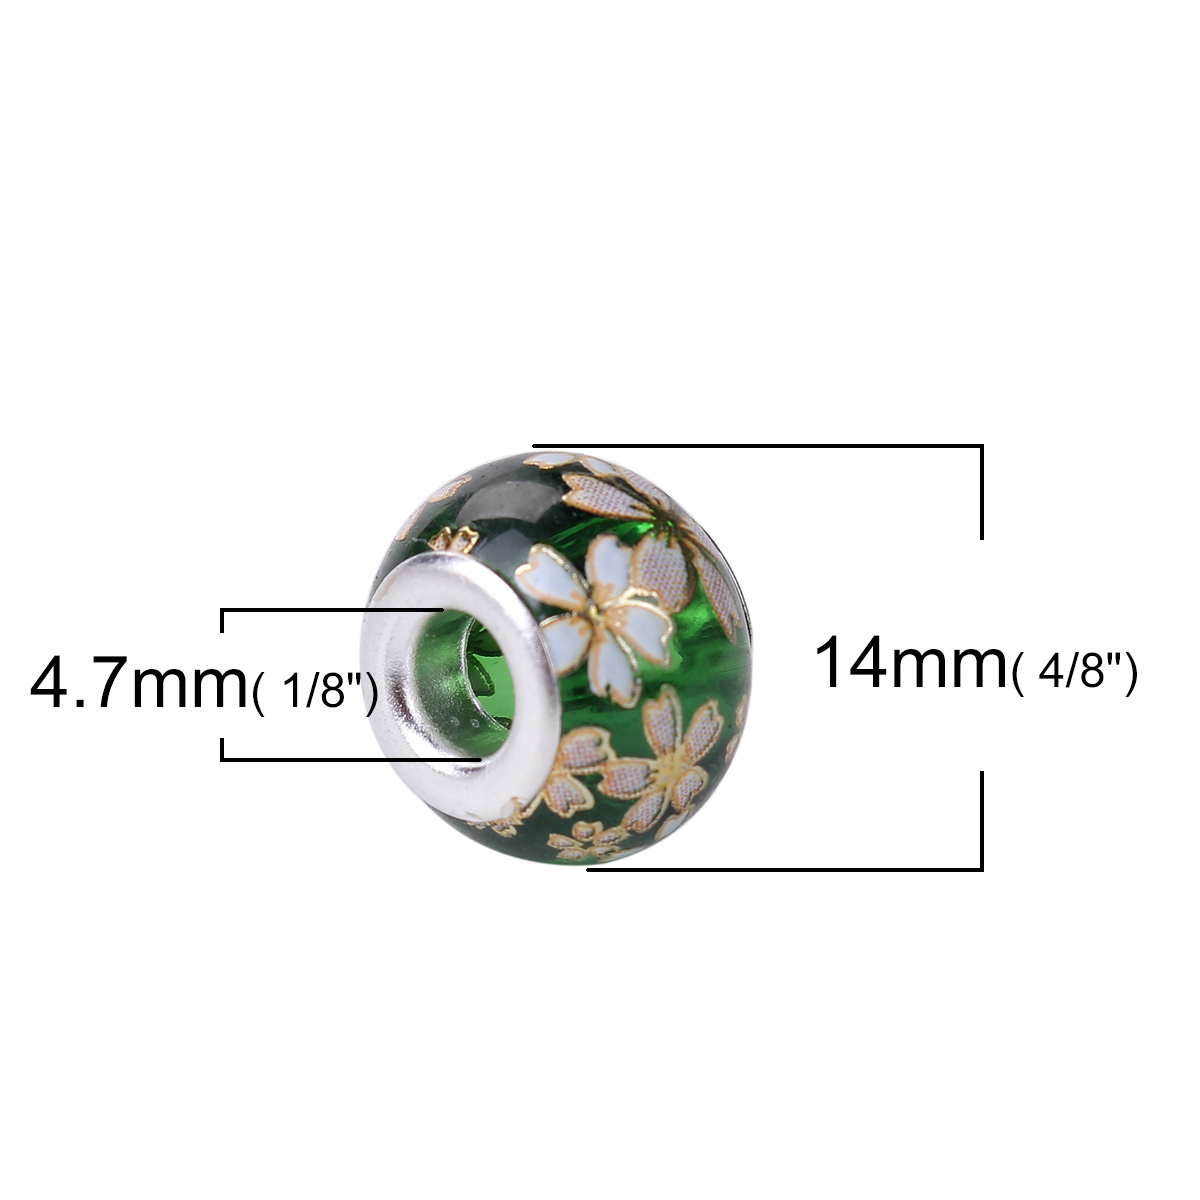 Picture of Glass Japan Painting Vintage Japanese Tensha European Style Large Hole Charm Beads Round Silver Plated Sakura Flower Green Transparent About 14mm( 4/8") Dia, Hole: Approx 4.7mm, 5 PCs